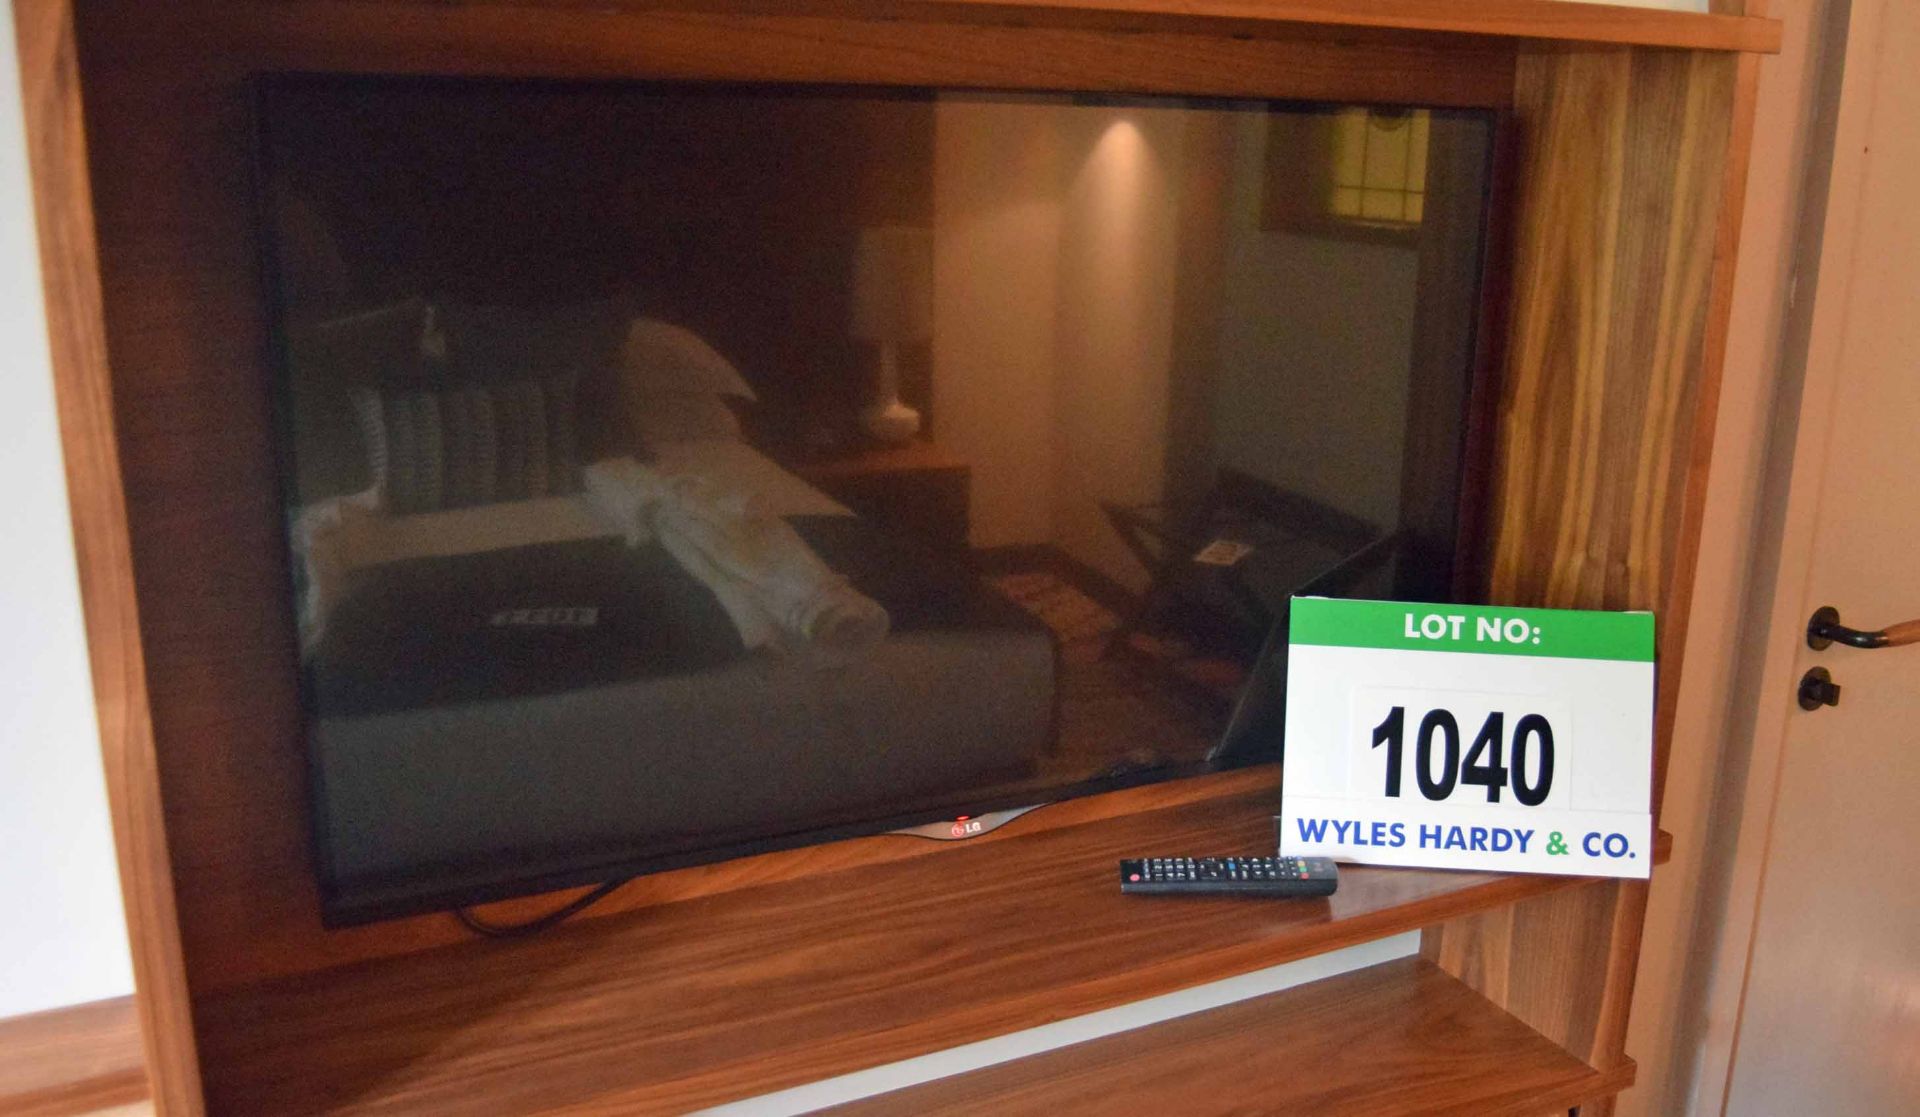 An LG 42UB820V 42 inch Smart Television on a Rigid Wall Bracket with Hand Held Remote Control